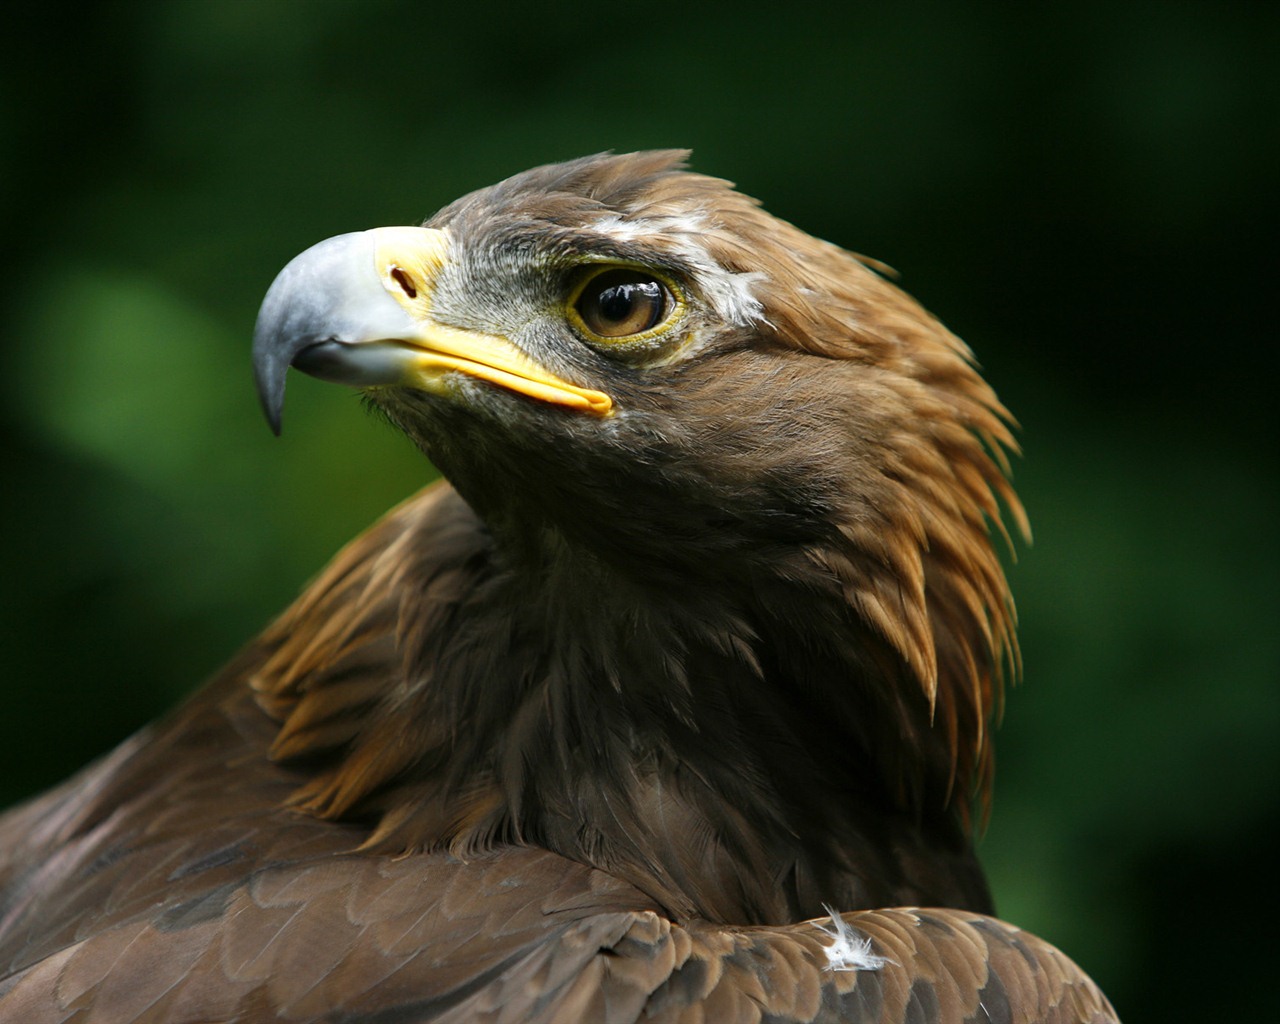 Windows 7 Wallpapers: aves rapaces #11 - 1280x1024